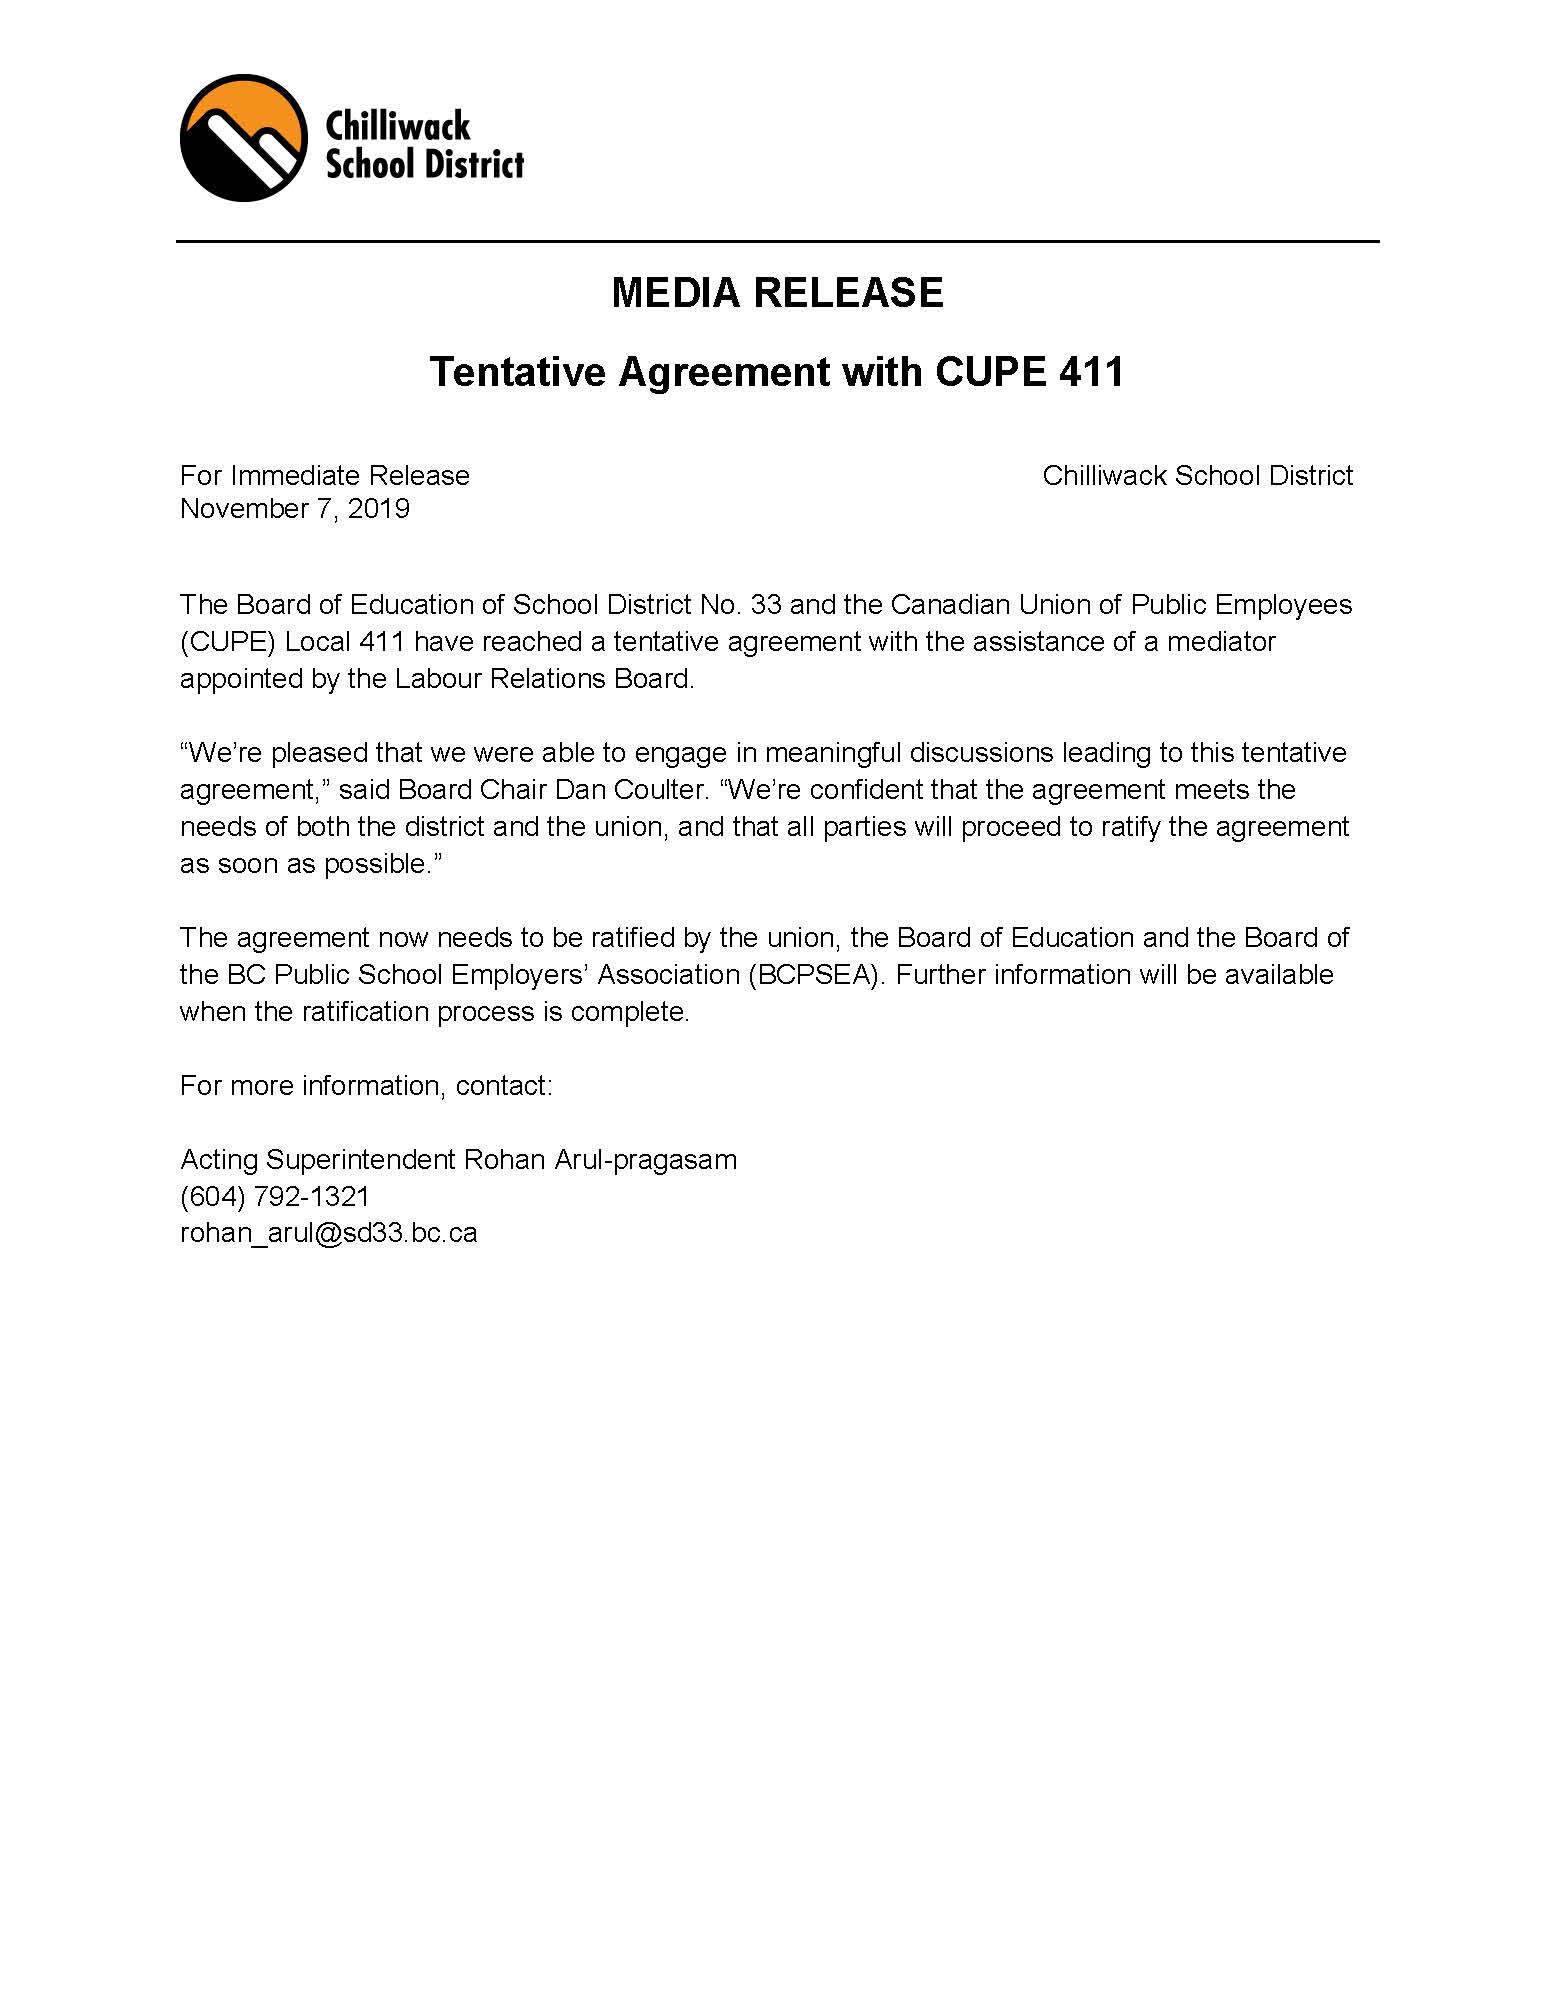 Media Release: Tentative Agreement with CUPE 411